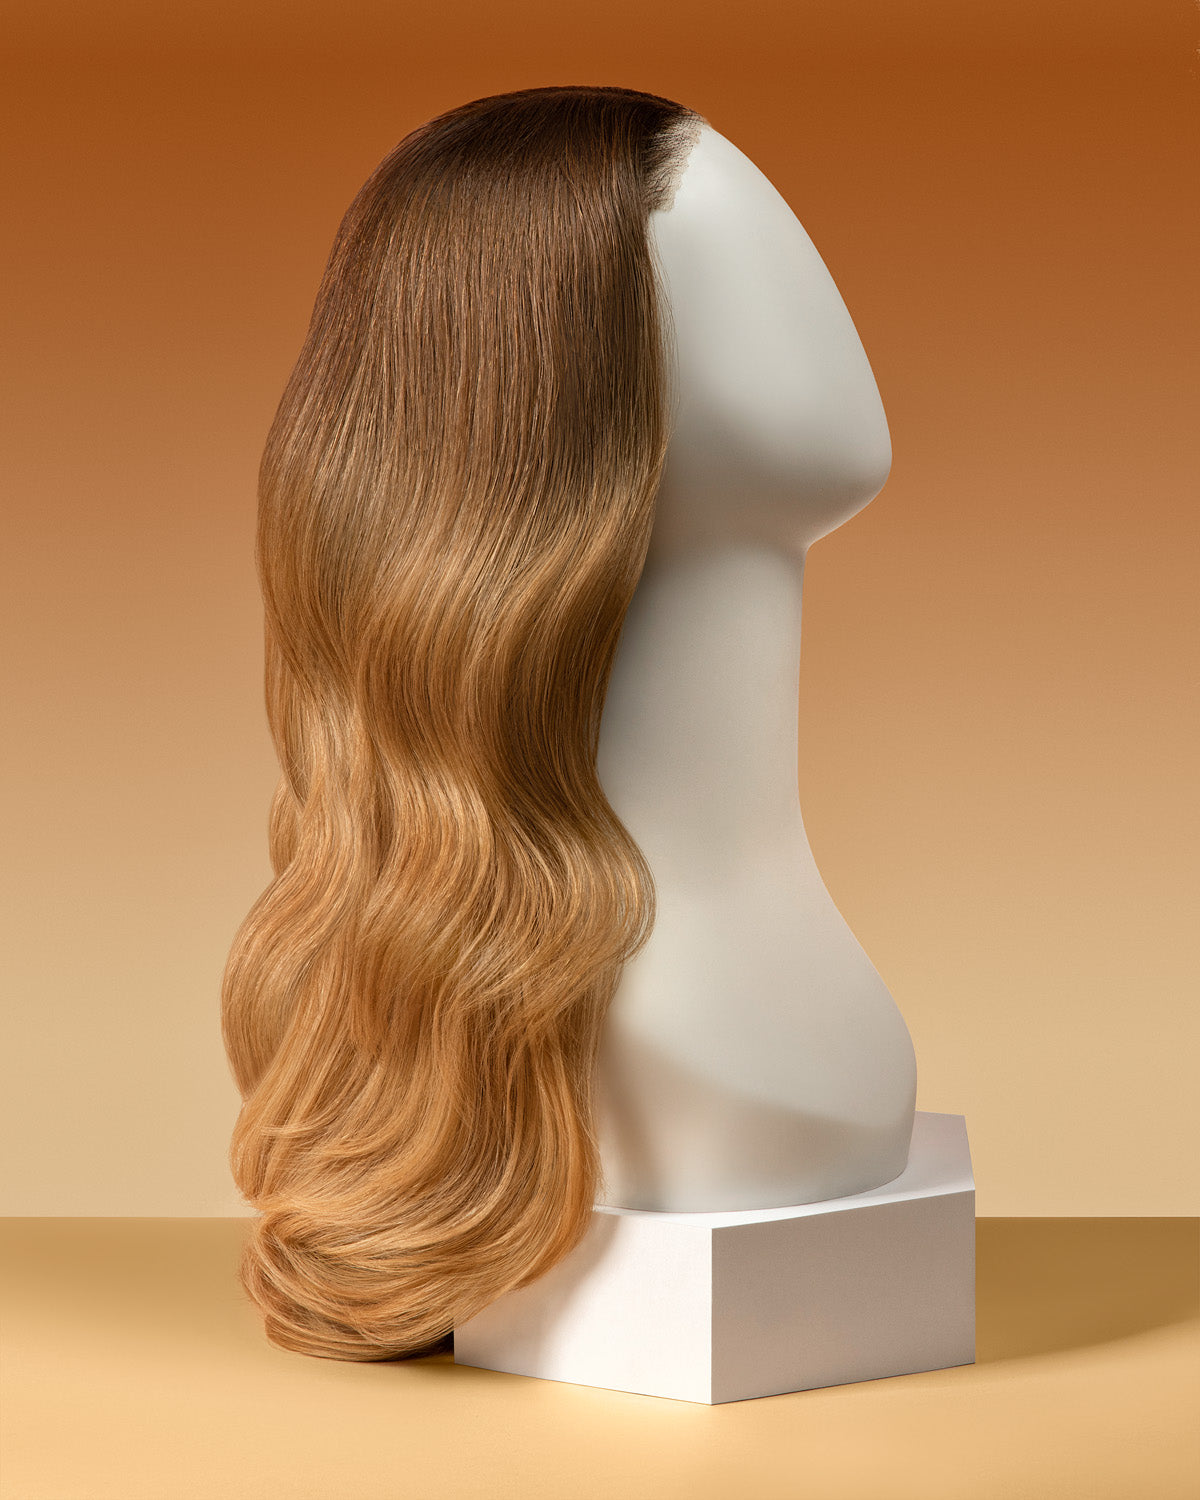 No Lace Wigs  Textured Tech